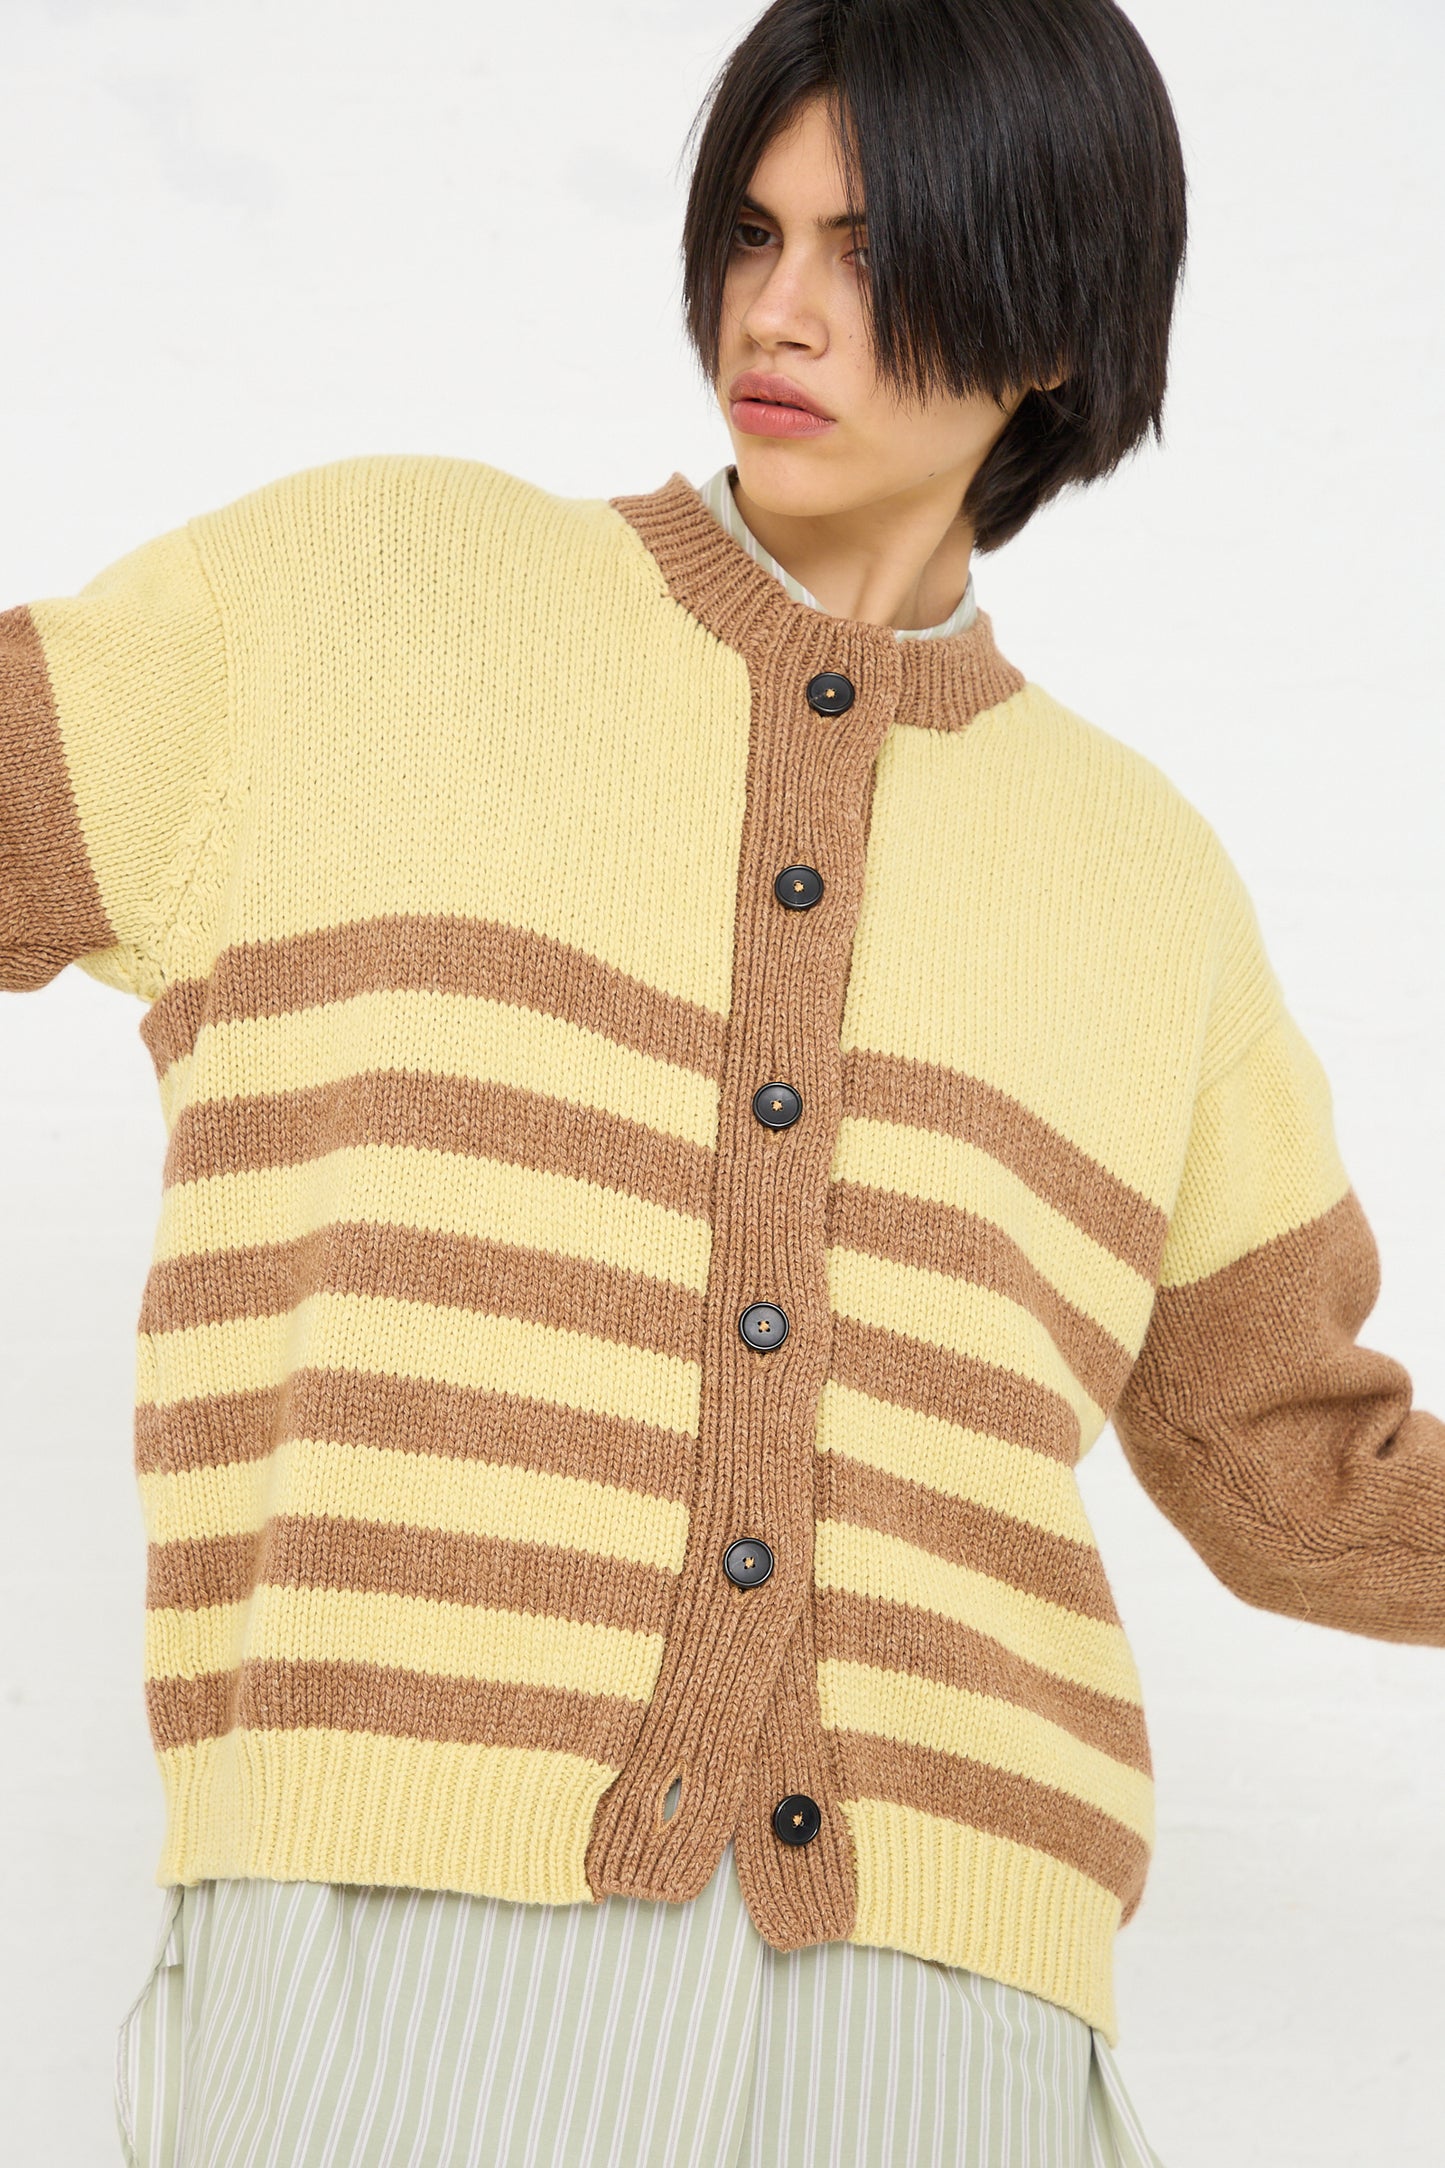 A person with a short dark hairstyle wearing a Cawley Cotton and Lambswool Textured Stripe Cardigan in Celery and Nutmeg over a light-colored vertical striped shirt, posing against a plain white background.